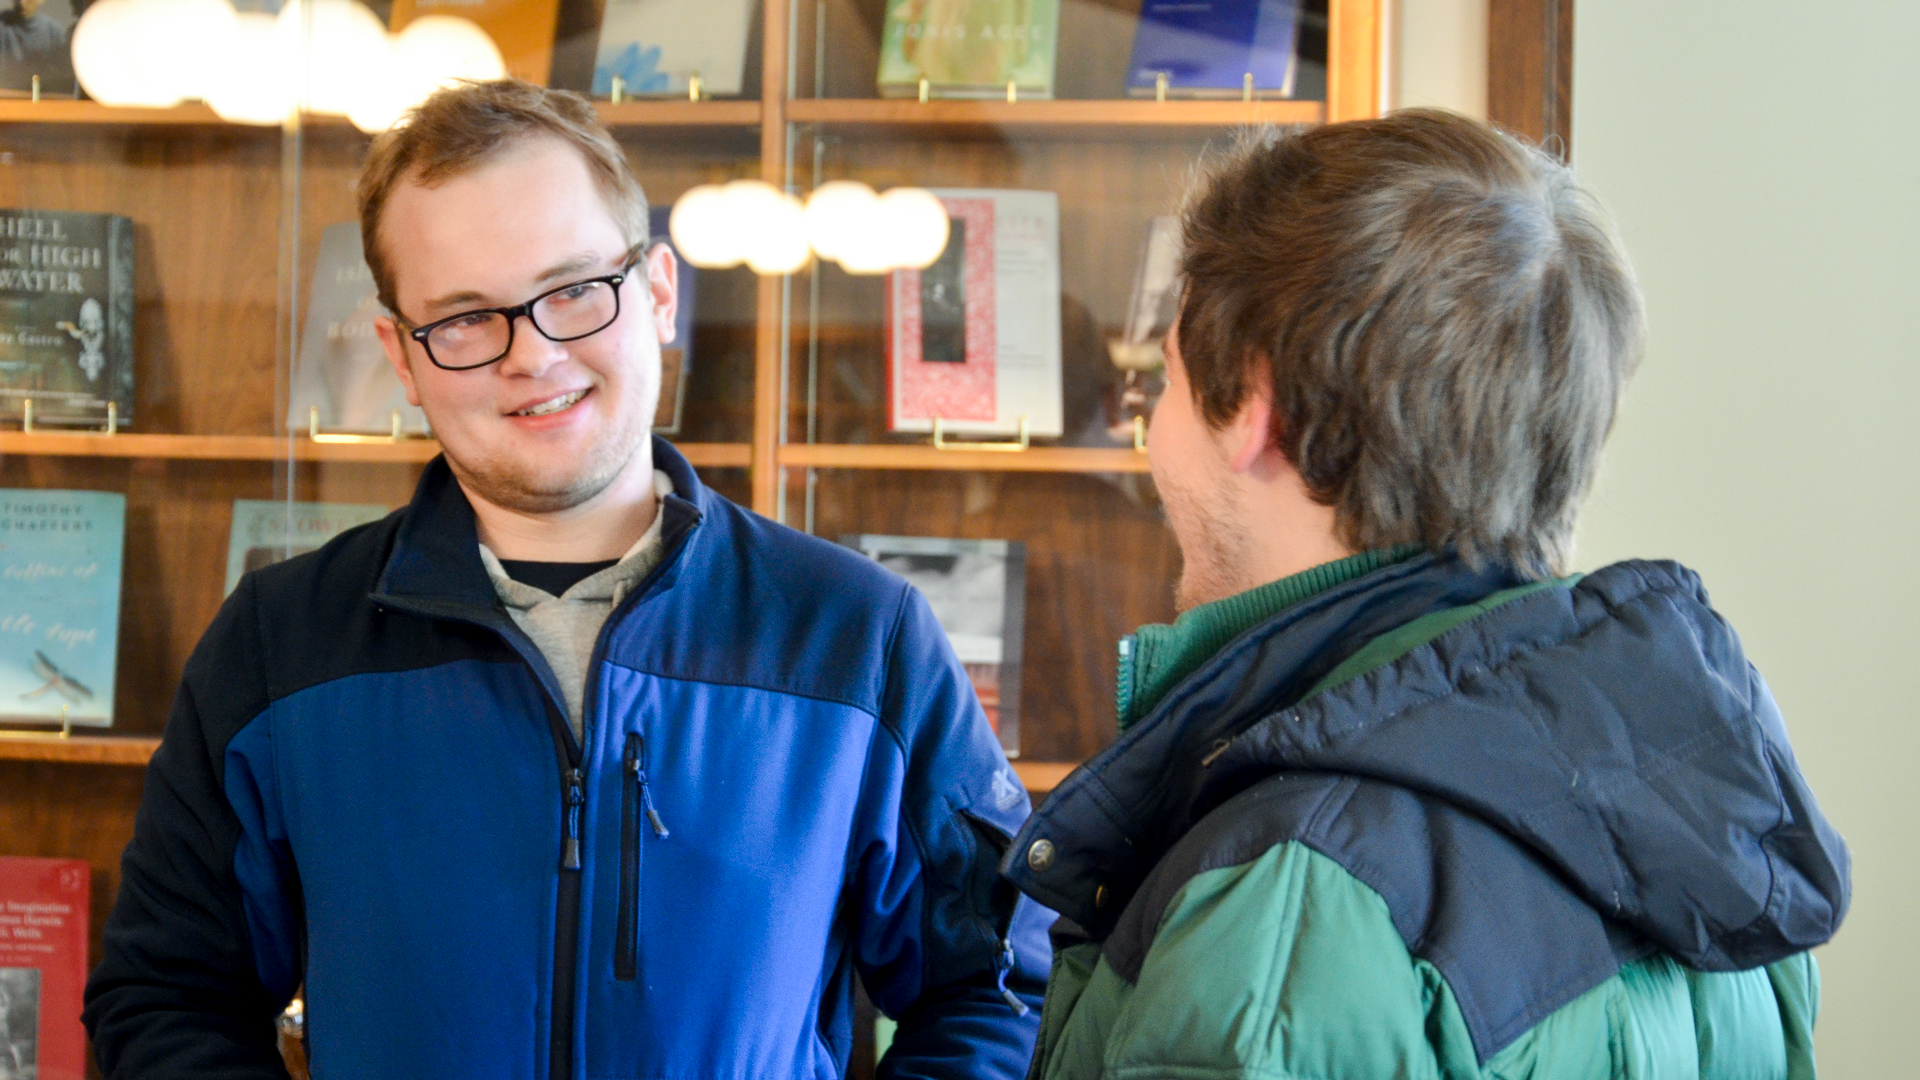 Students conversing at an advising event